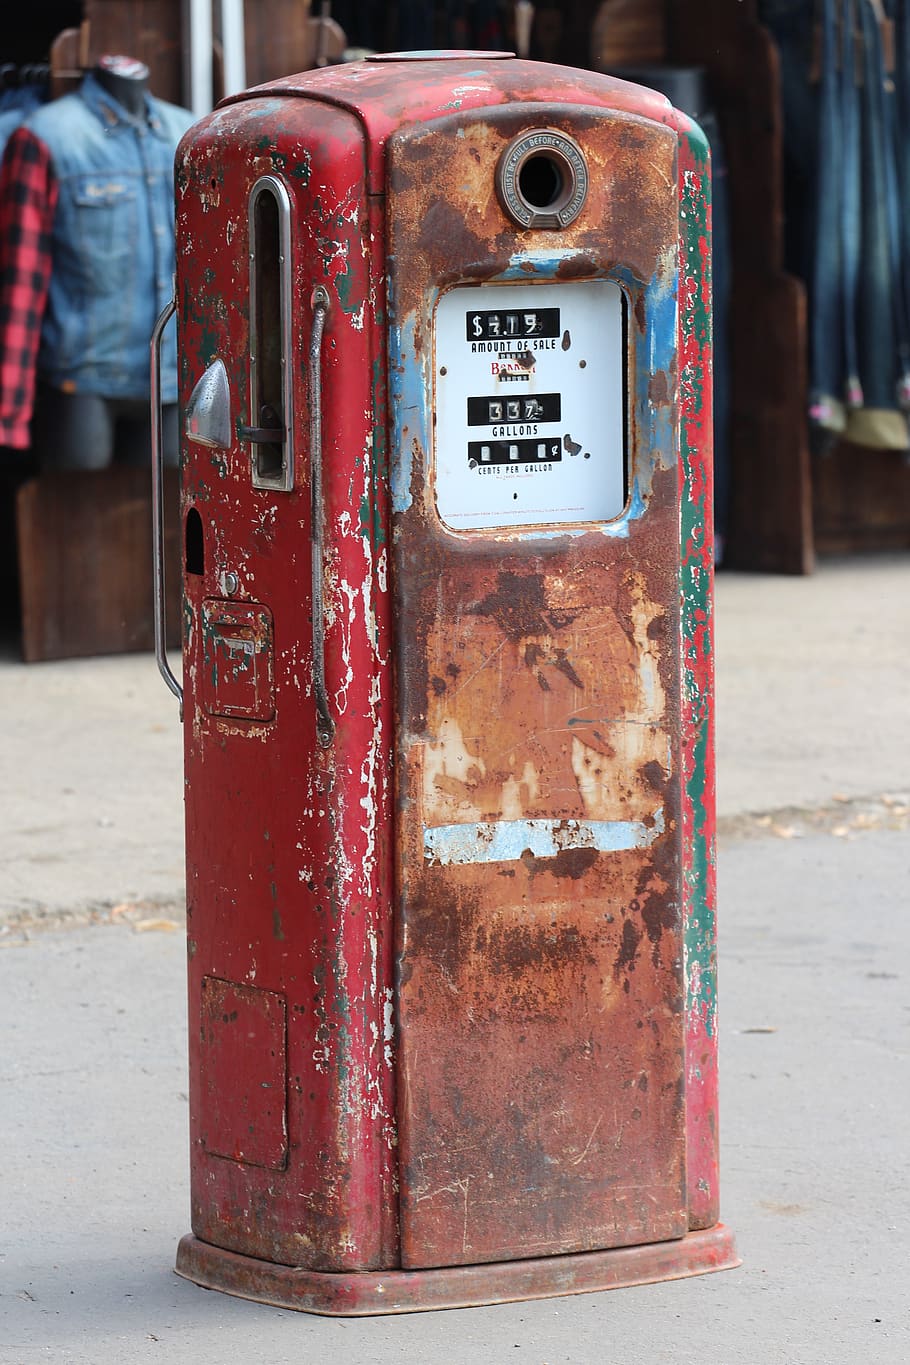 stand, history, old, historical, communication, fuel pump, telephone, refueling, day, red